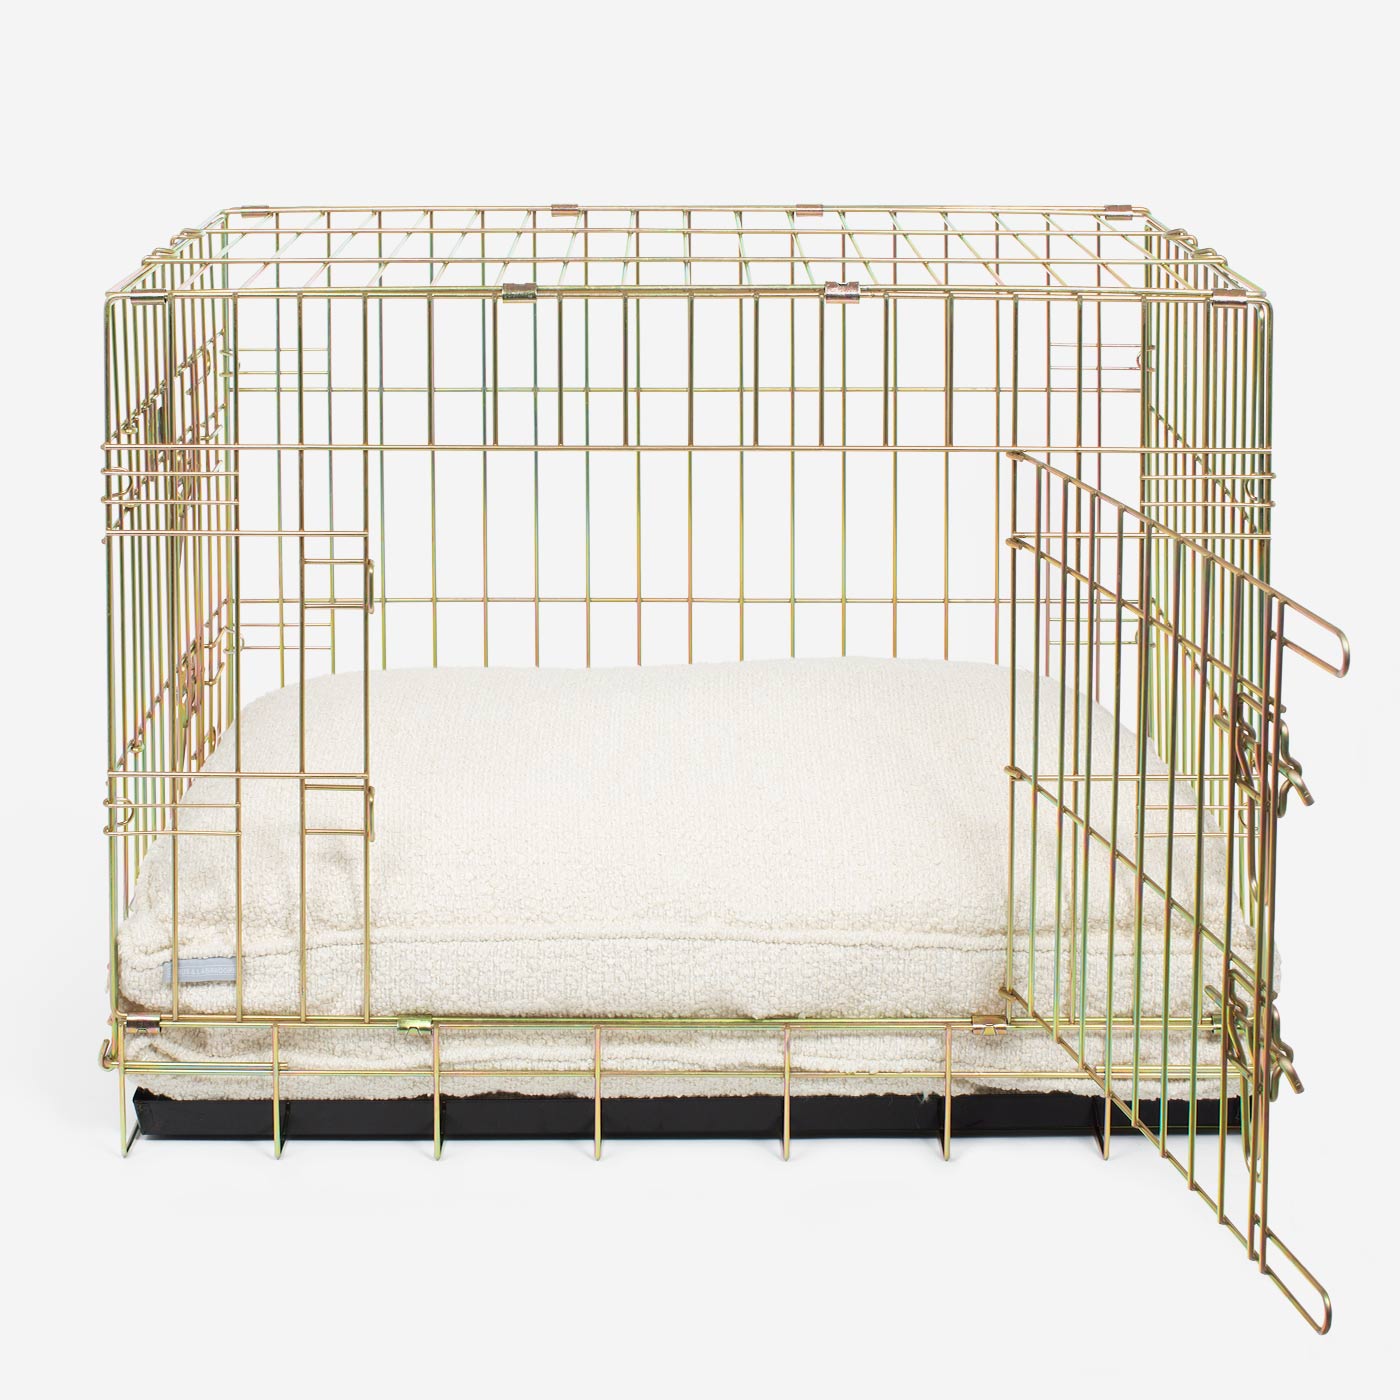 Discover Our Heavy-Duty Dog Cage With Luxury Dog Cushion Set! The Perfect Cage Accessory For Pet Burrow. Available To Personalize In Stunning Ivory, Mink, Granite Bouclé Here at Lords & Labradors US